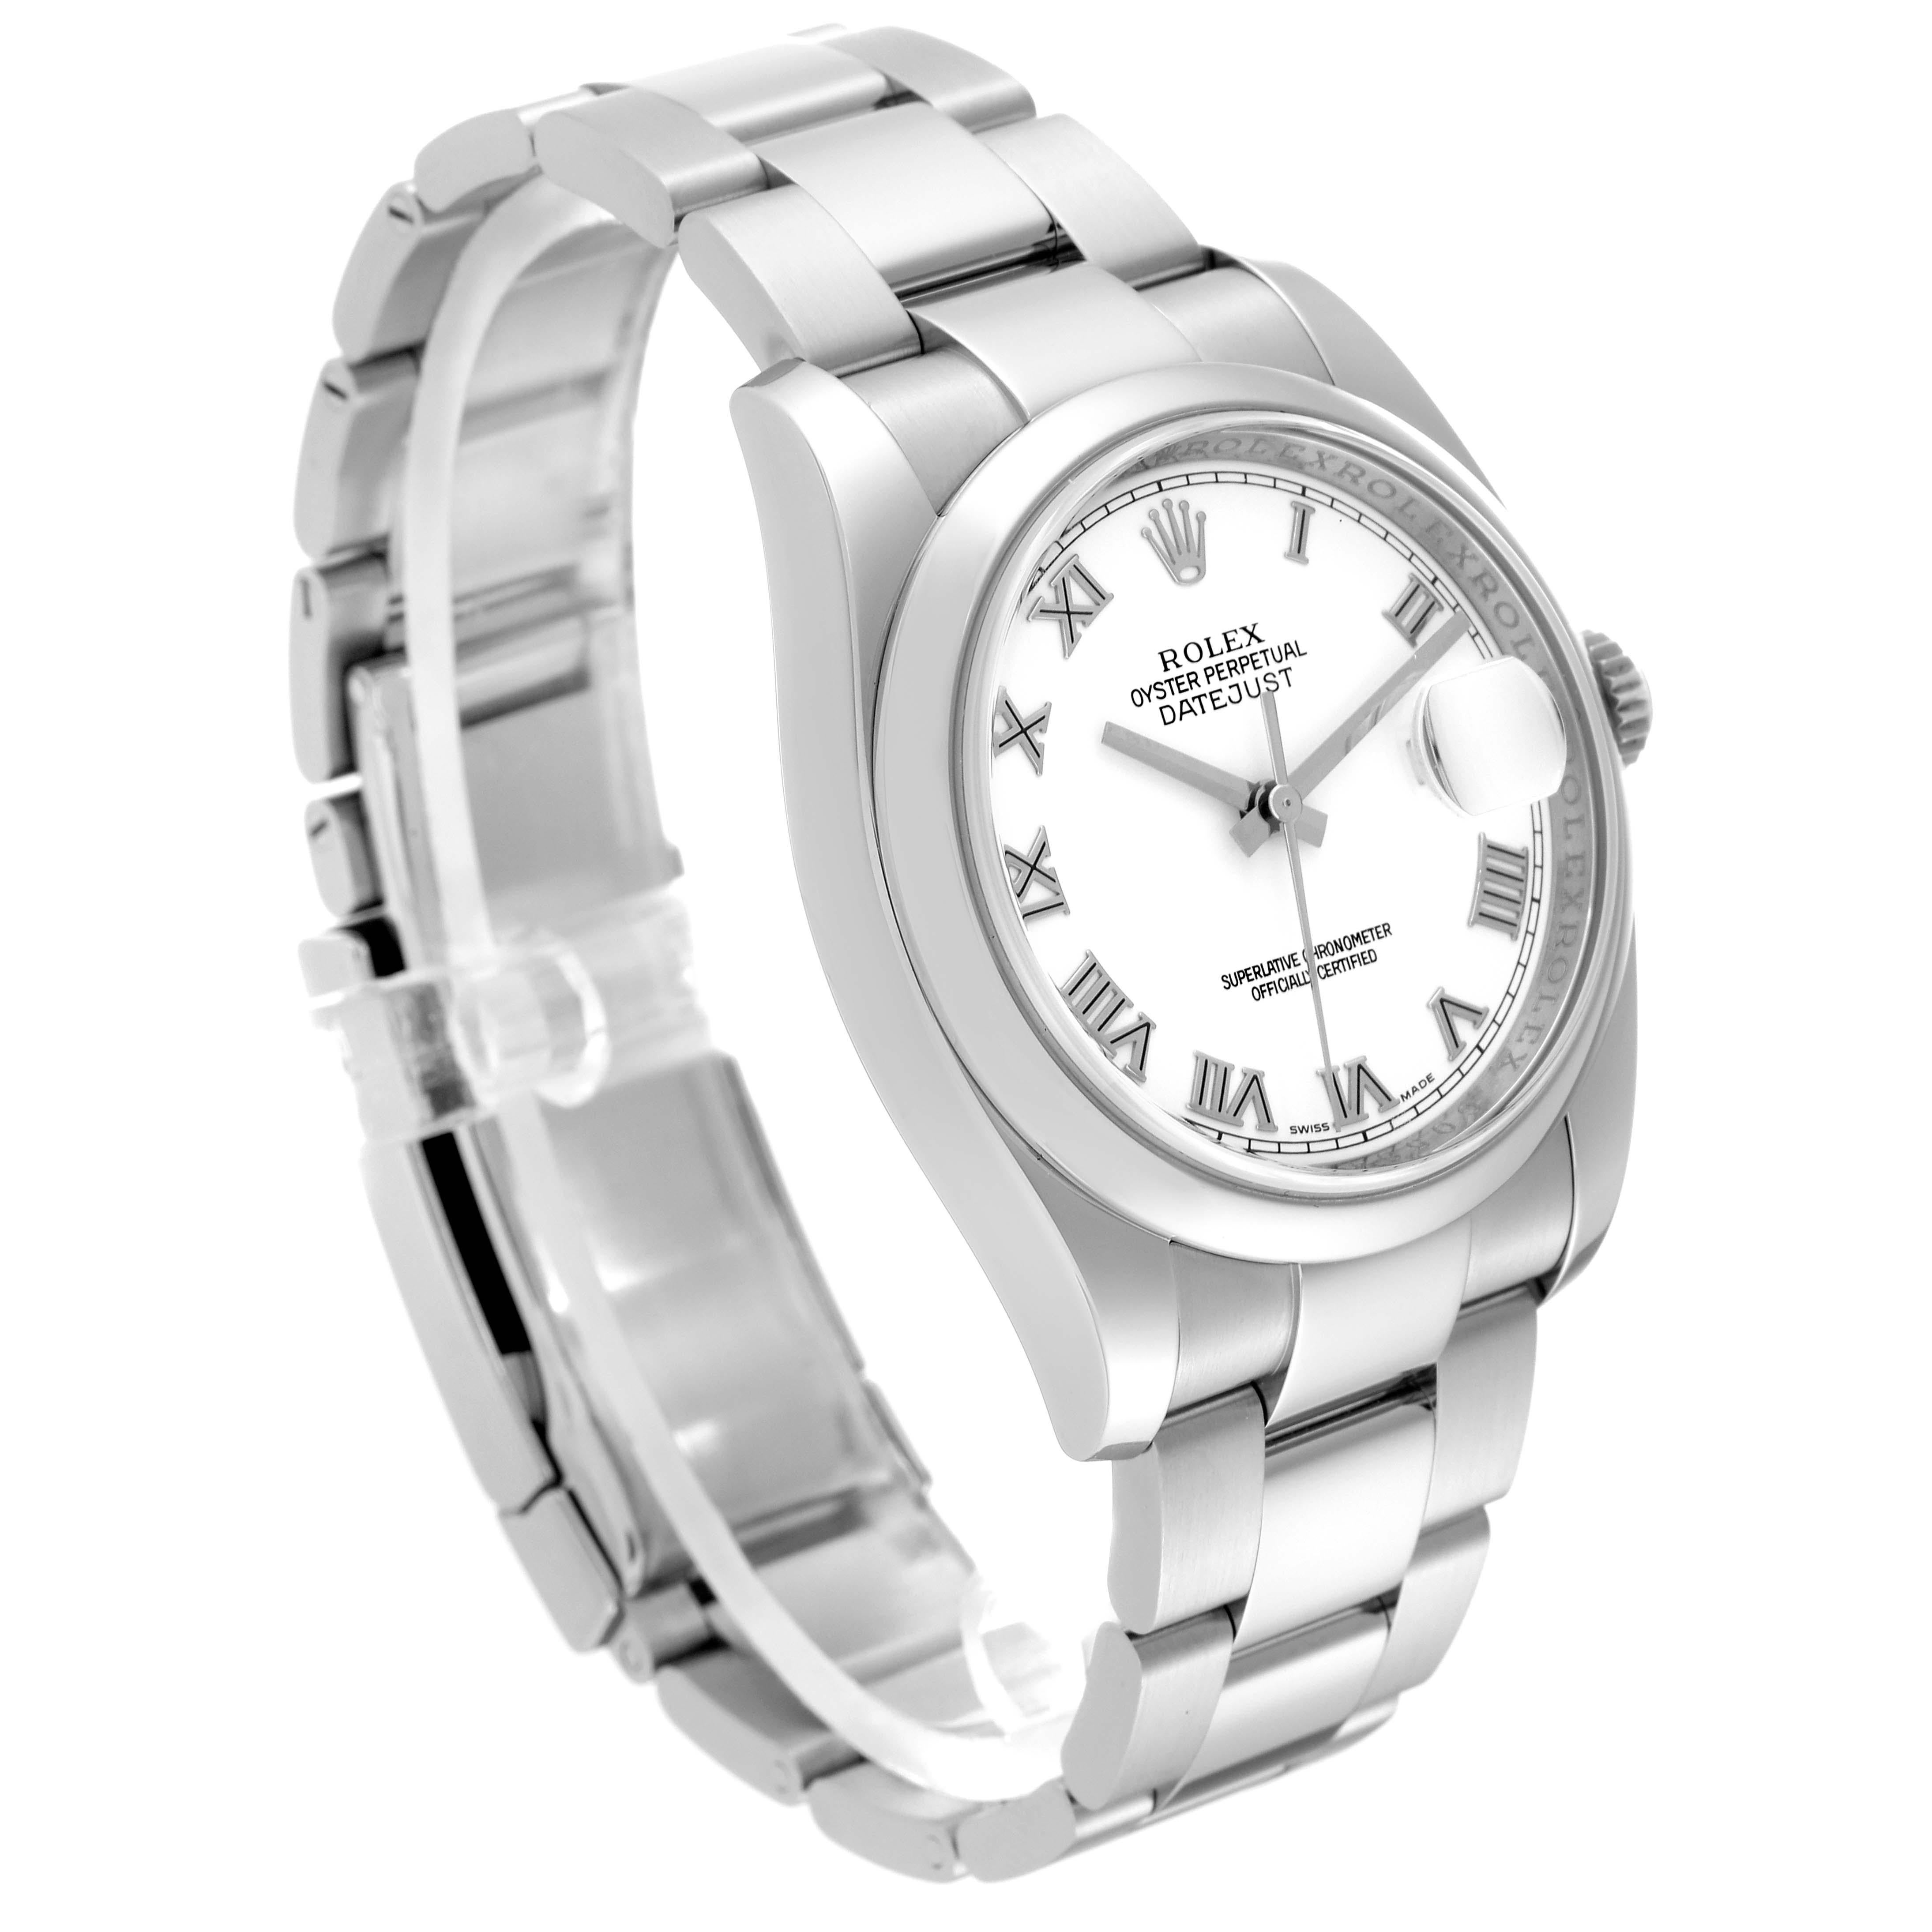 Rolex Datejust White Roman Dial Steel Mens Watch 116200 Box Card For Sale 3